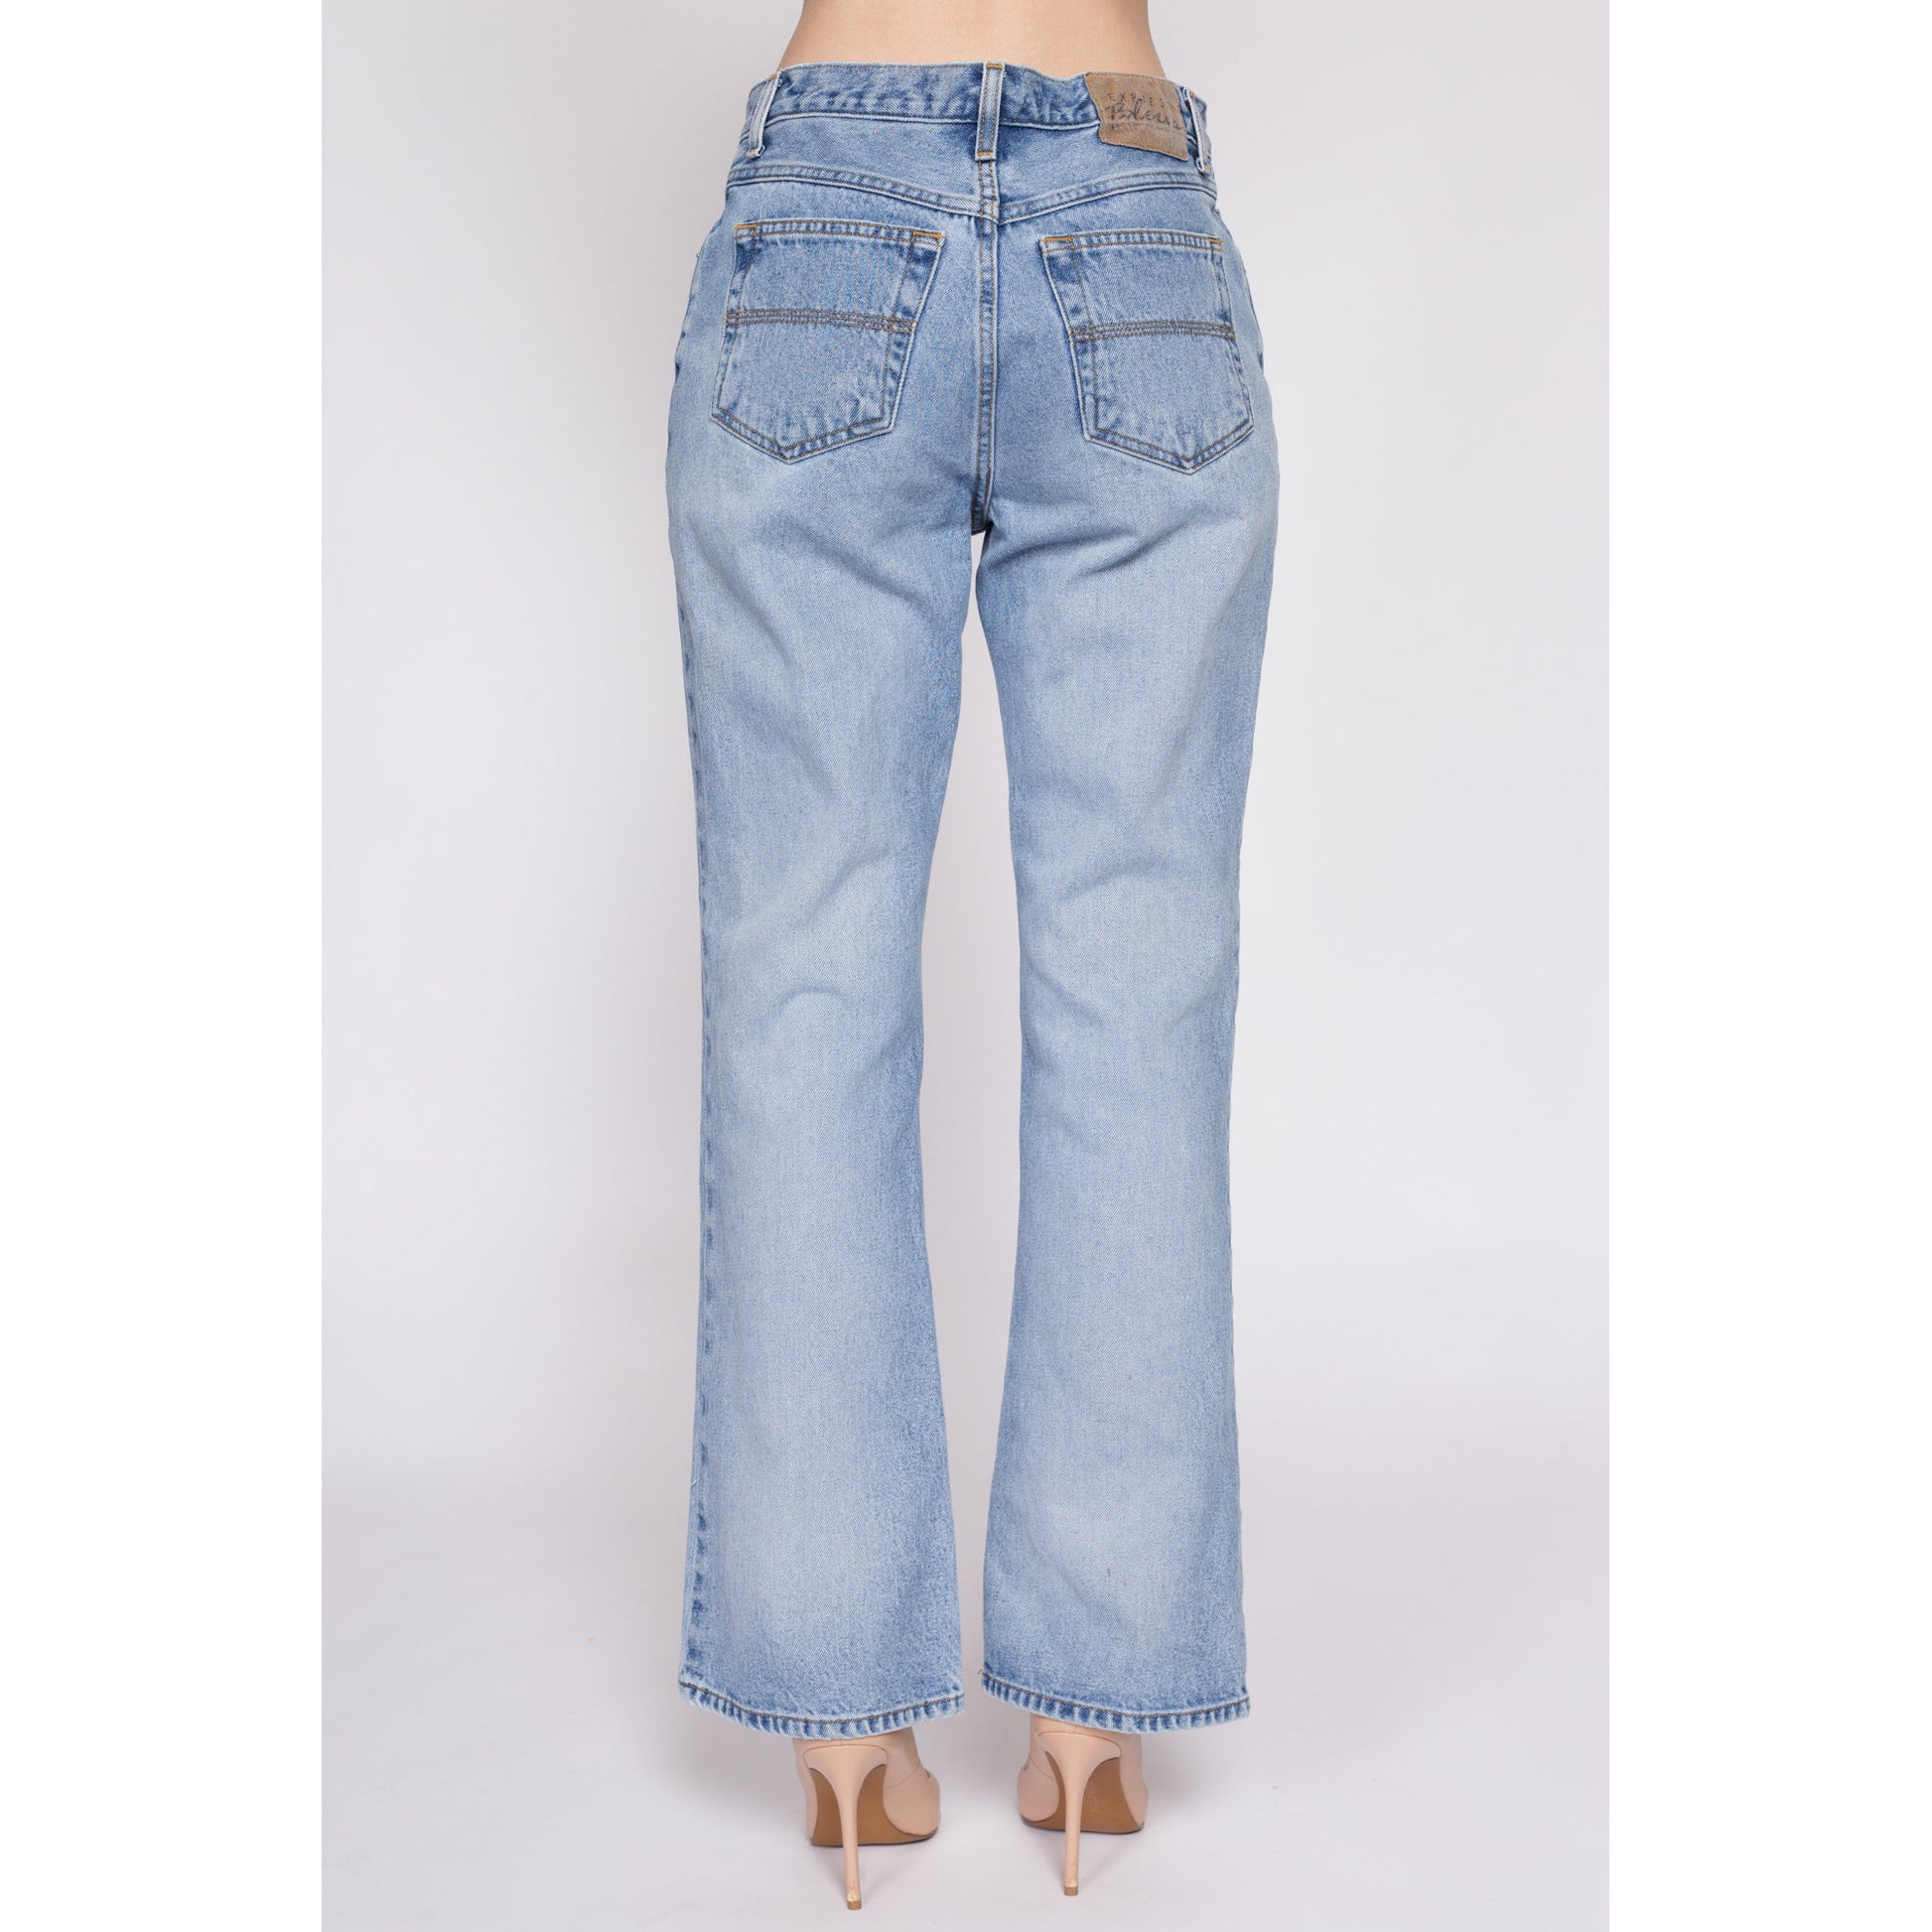 Bootcut Jeans Girls at Rs 340/piece